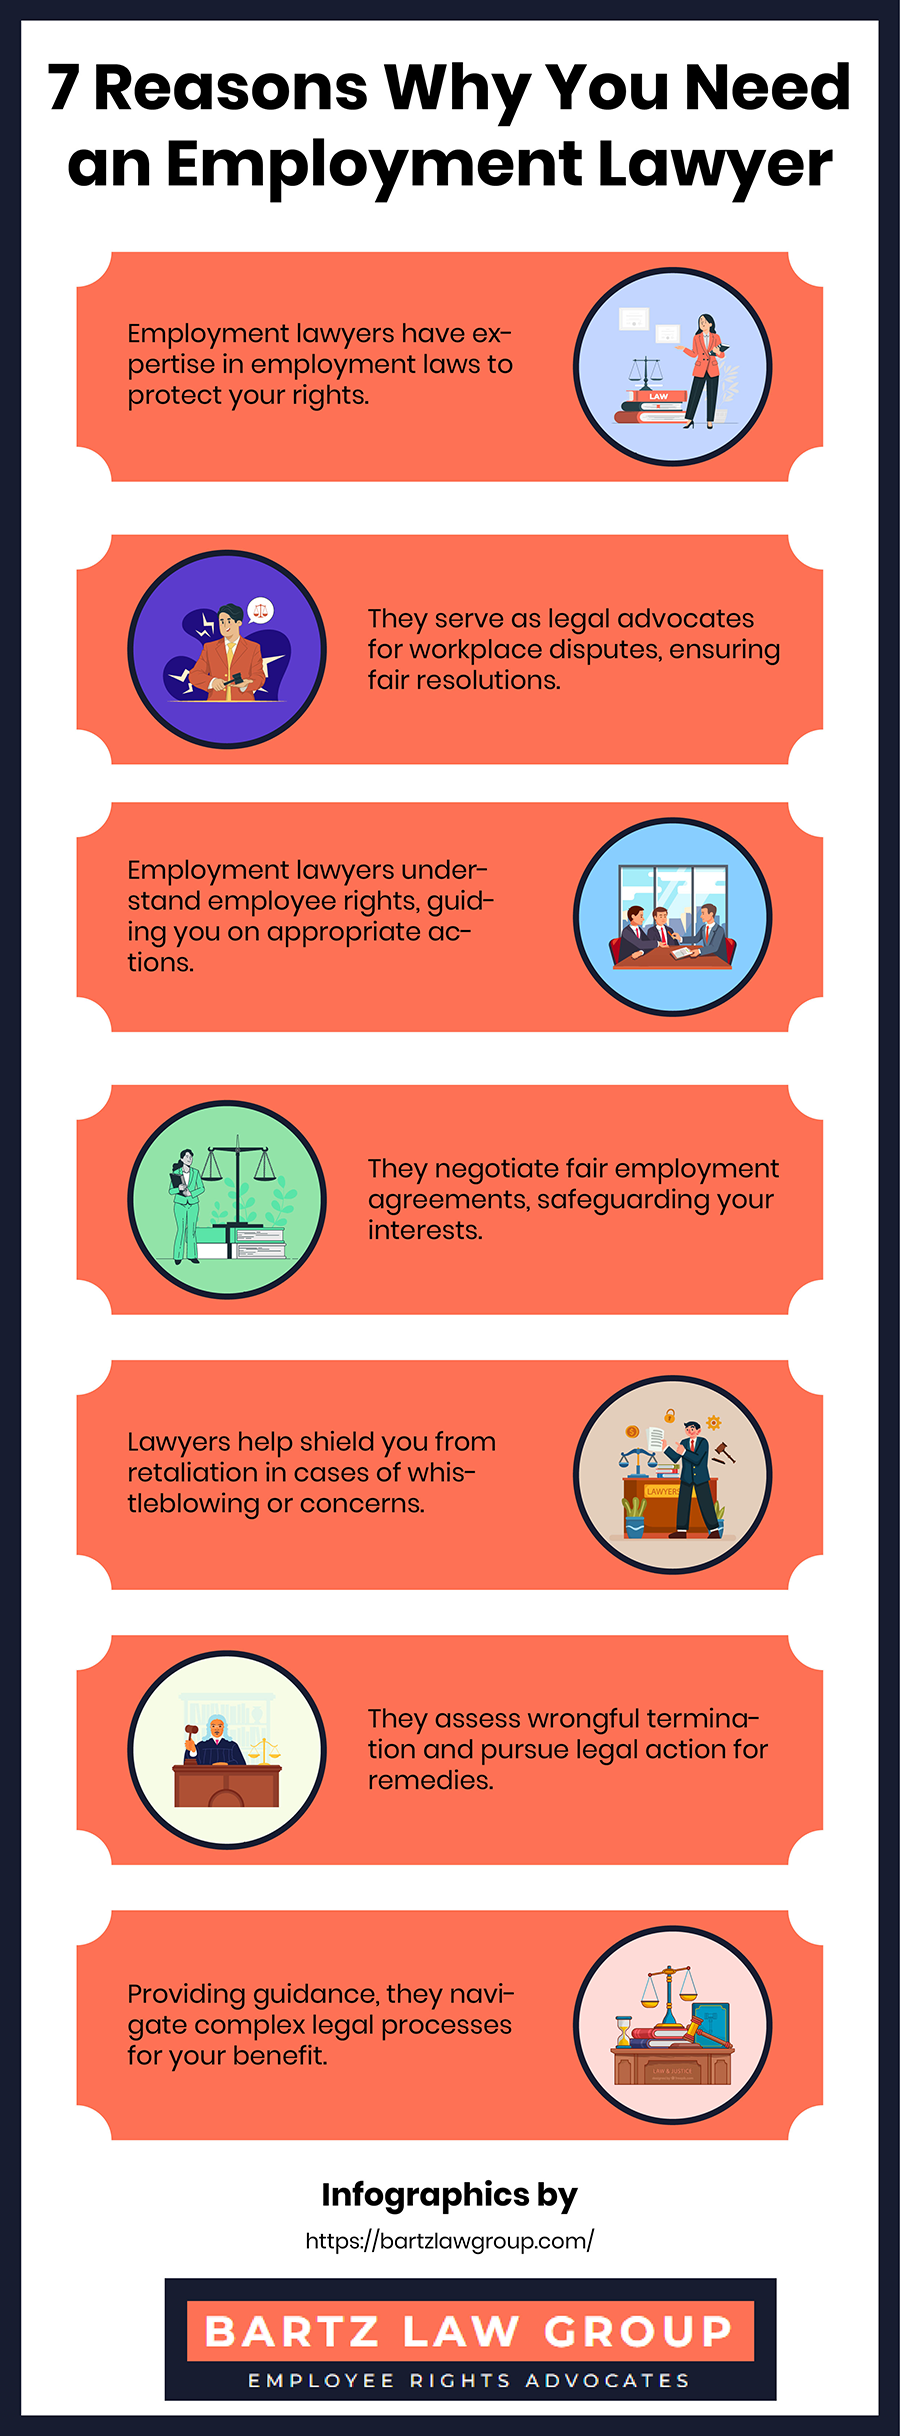 Reasons Why You Need an Employment Lawyer